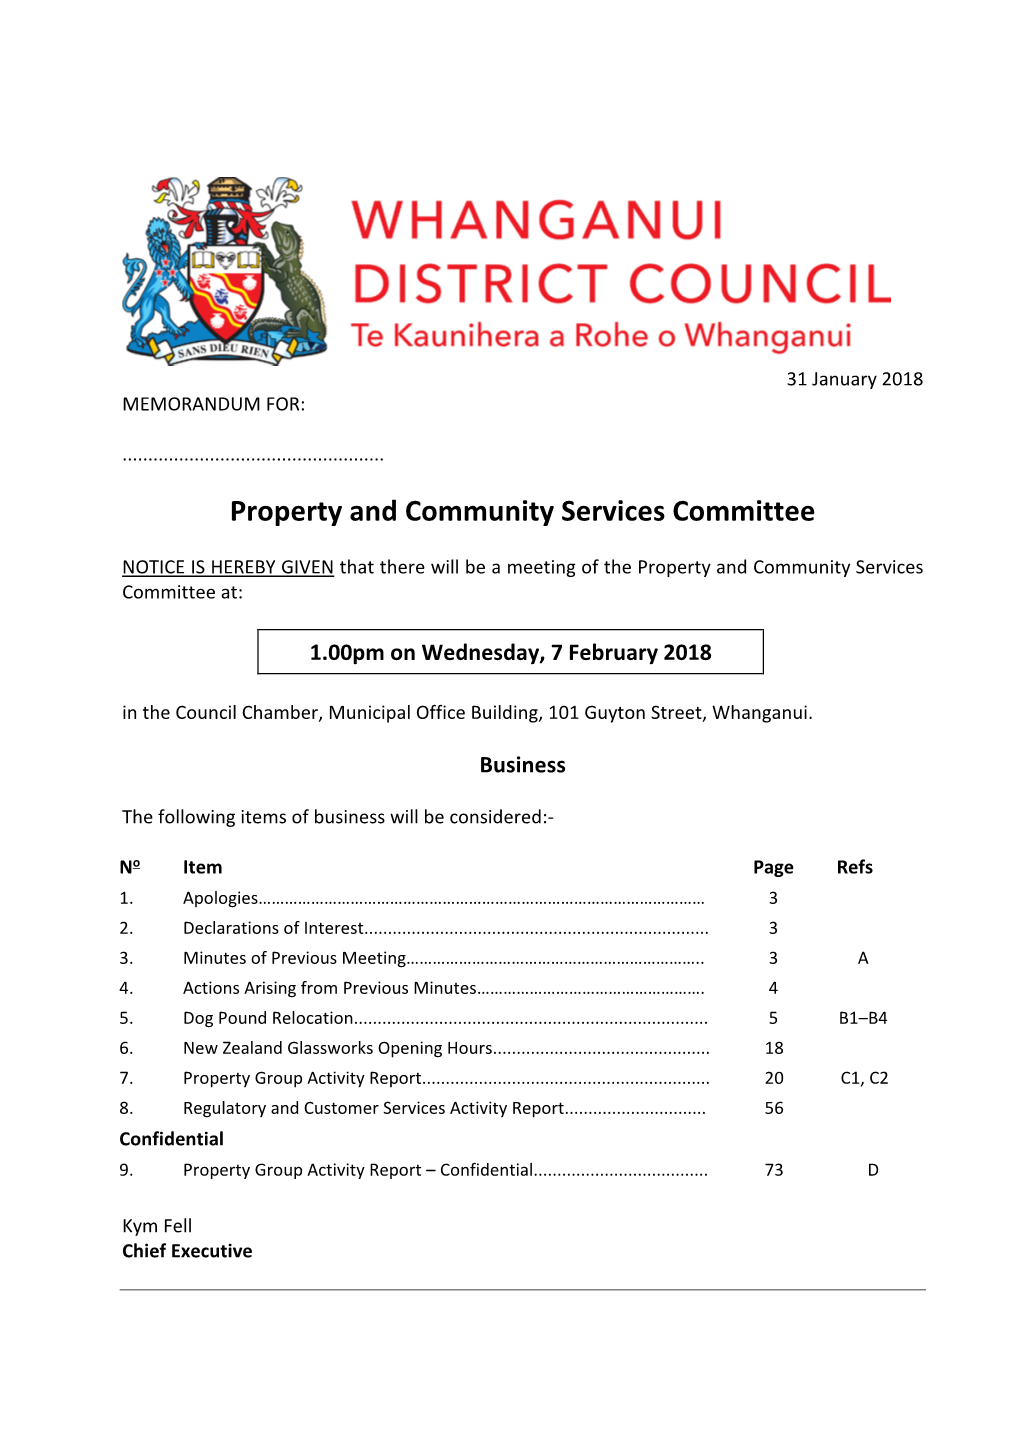 Property and Community Services Committee